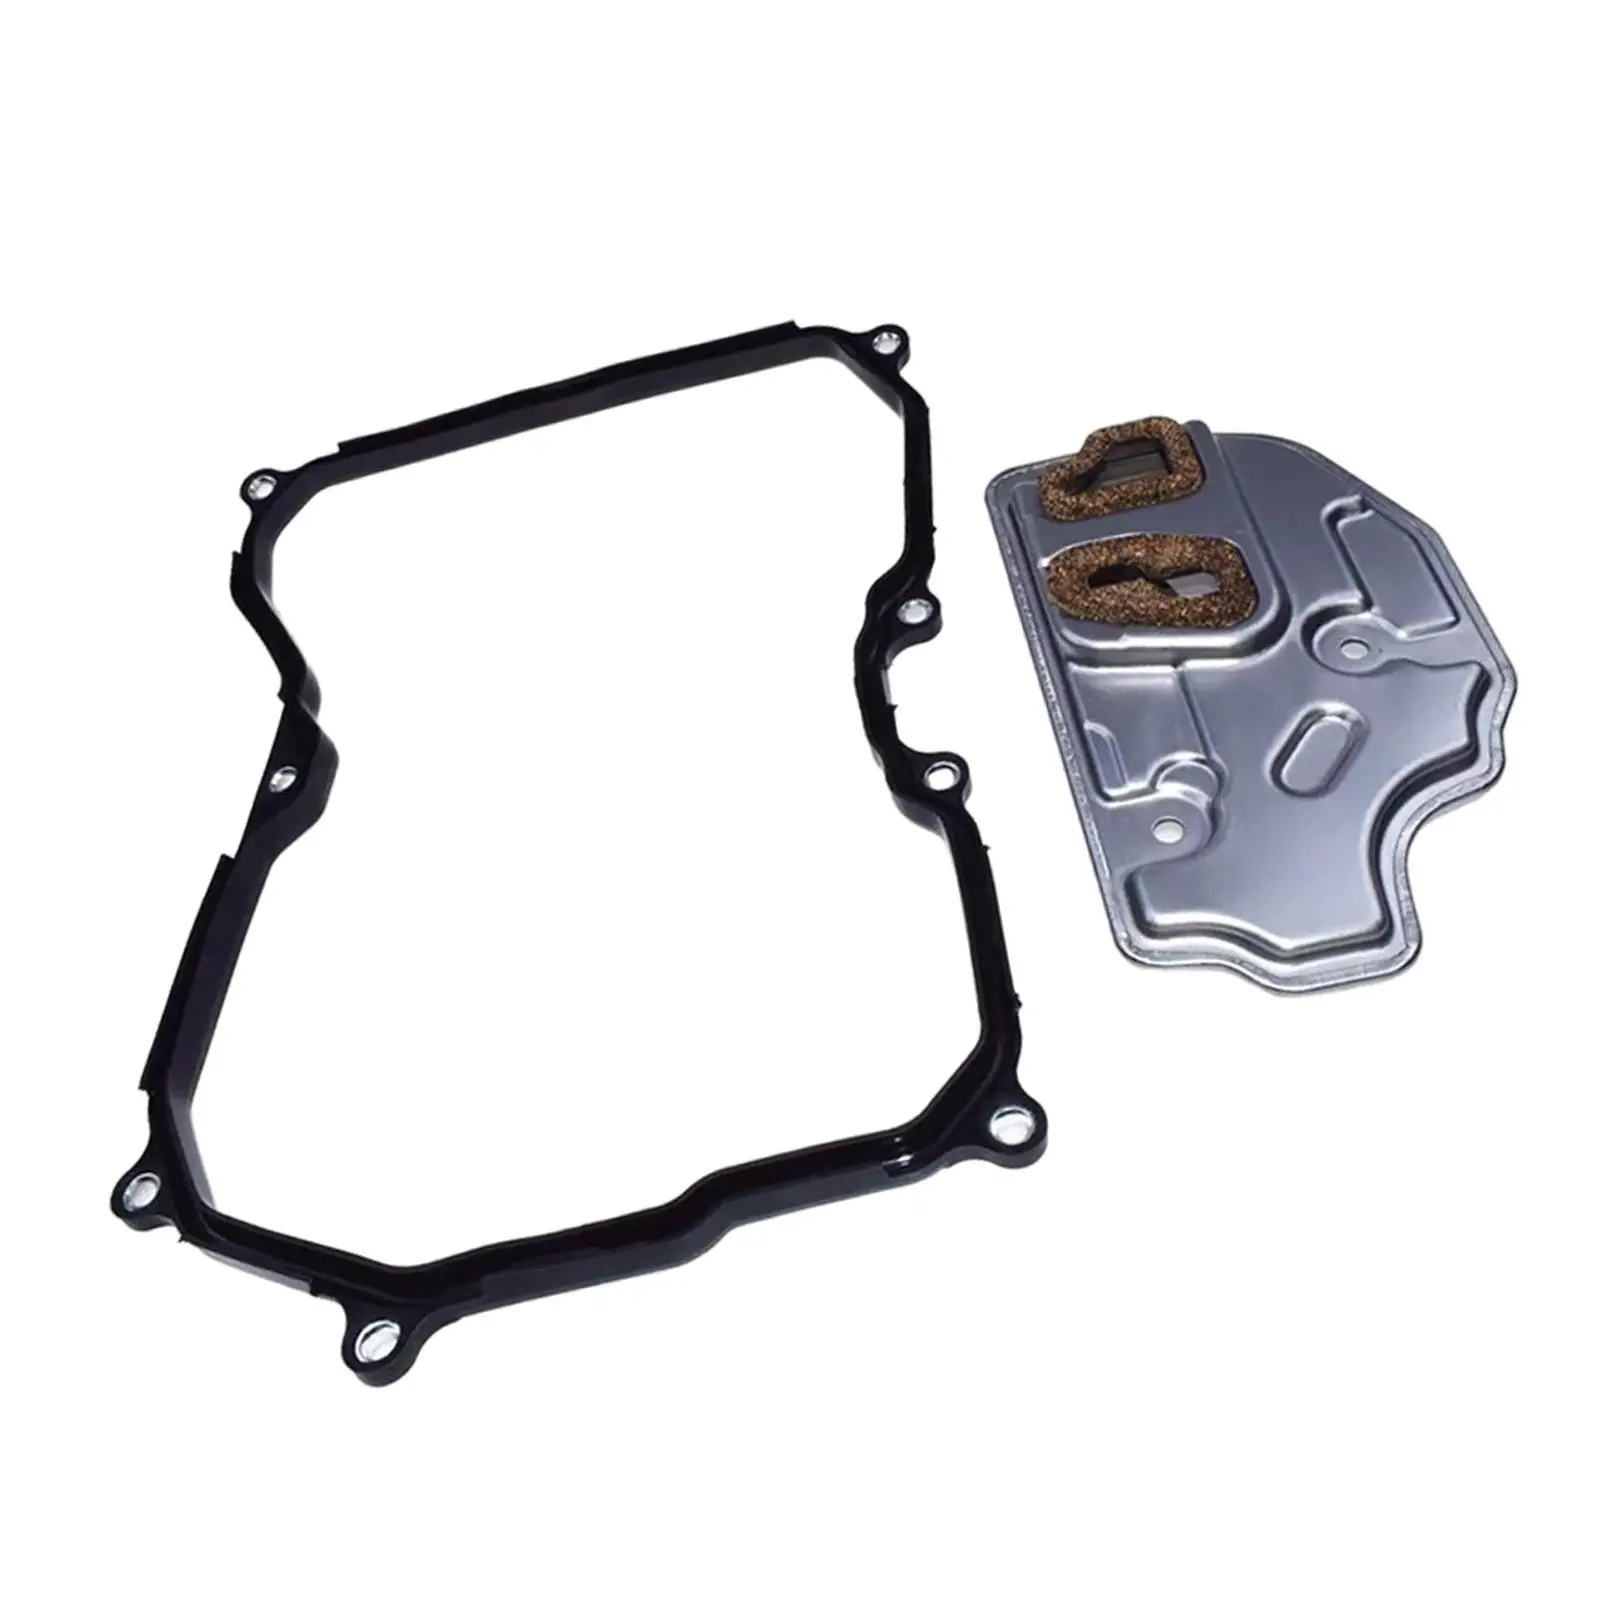 Car Automatic Transmission Oil Filter & Gasket for B6 cc